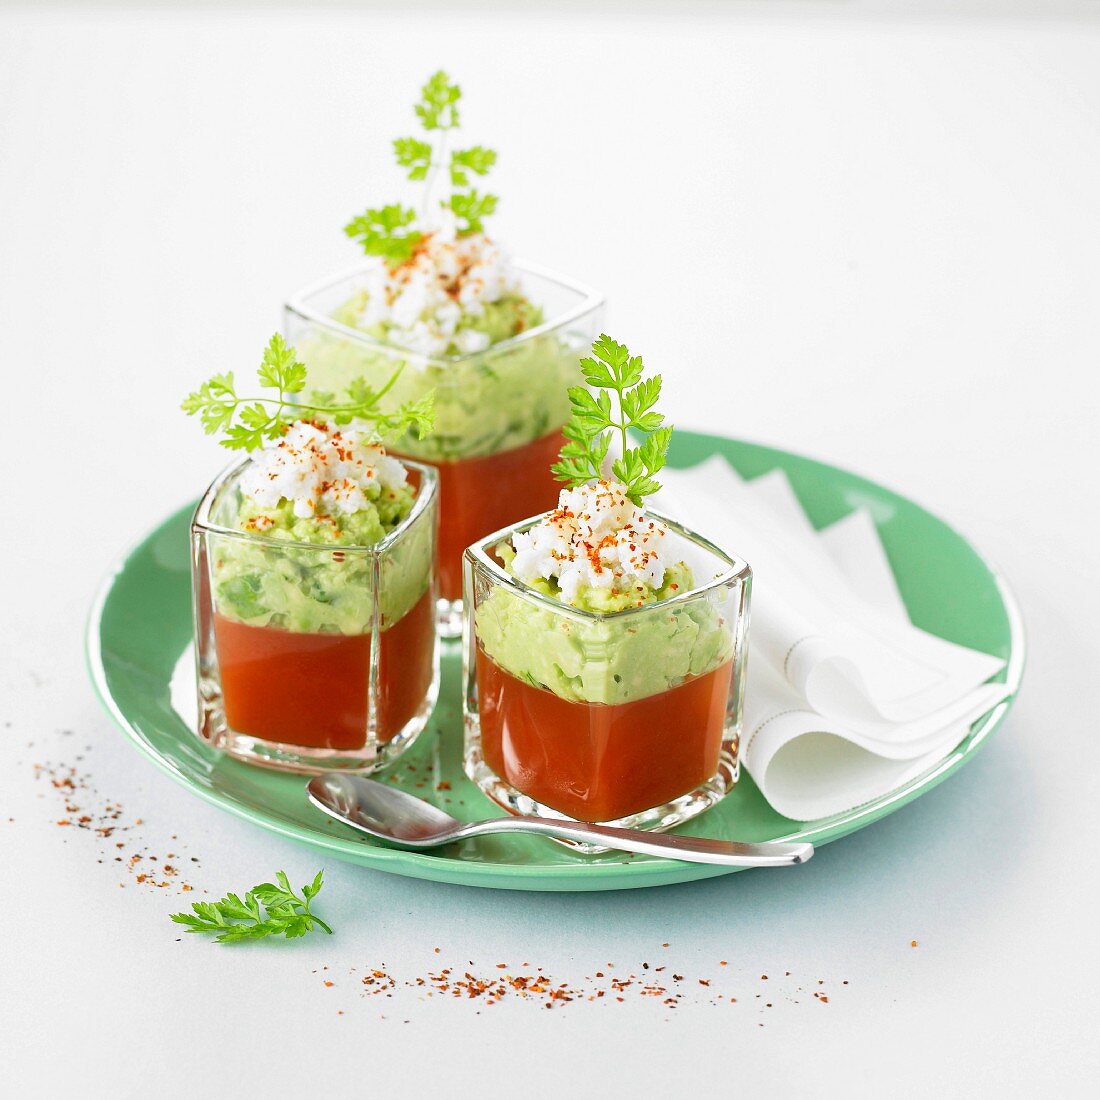 Tomato gazpacho, cucumber puree with cream, fromage frais crumb and paprika Verrines